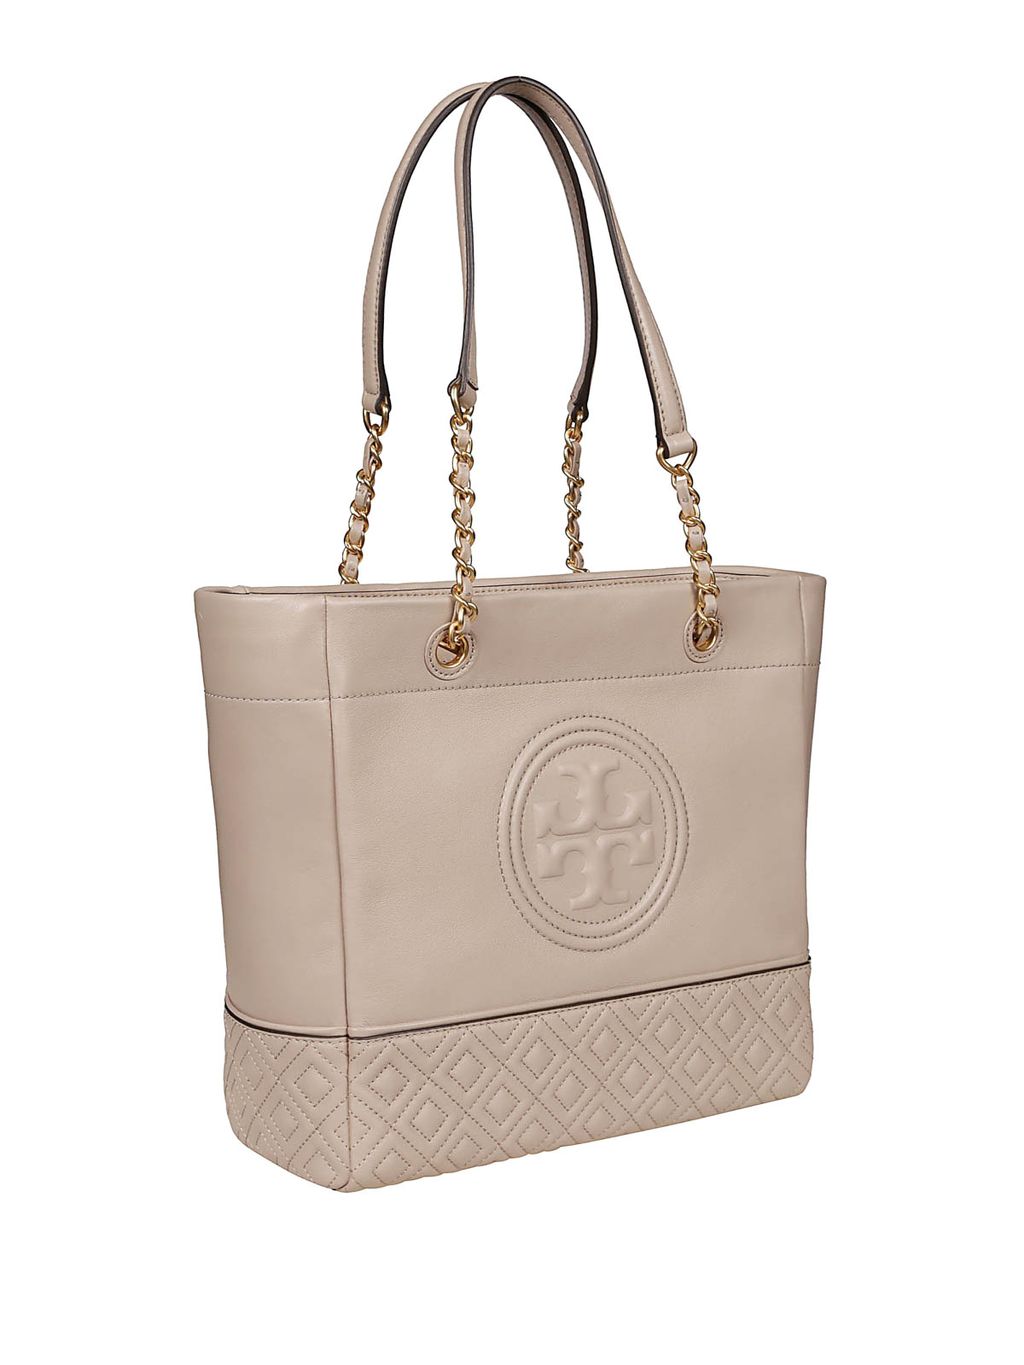 tory-burch-online-totes-bags-fleming-light-taupe-leather-tote-bag-00000148468f00s002.jpg